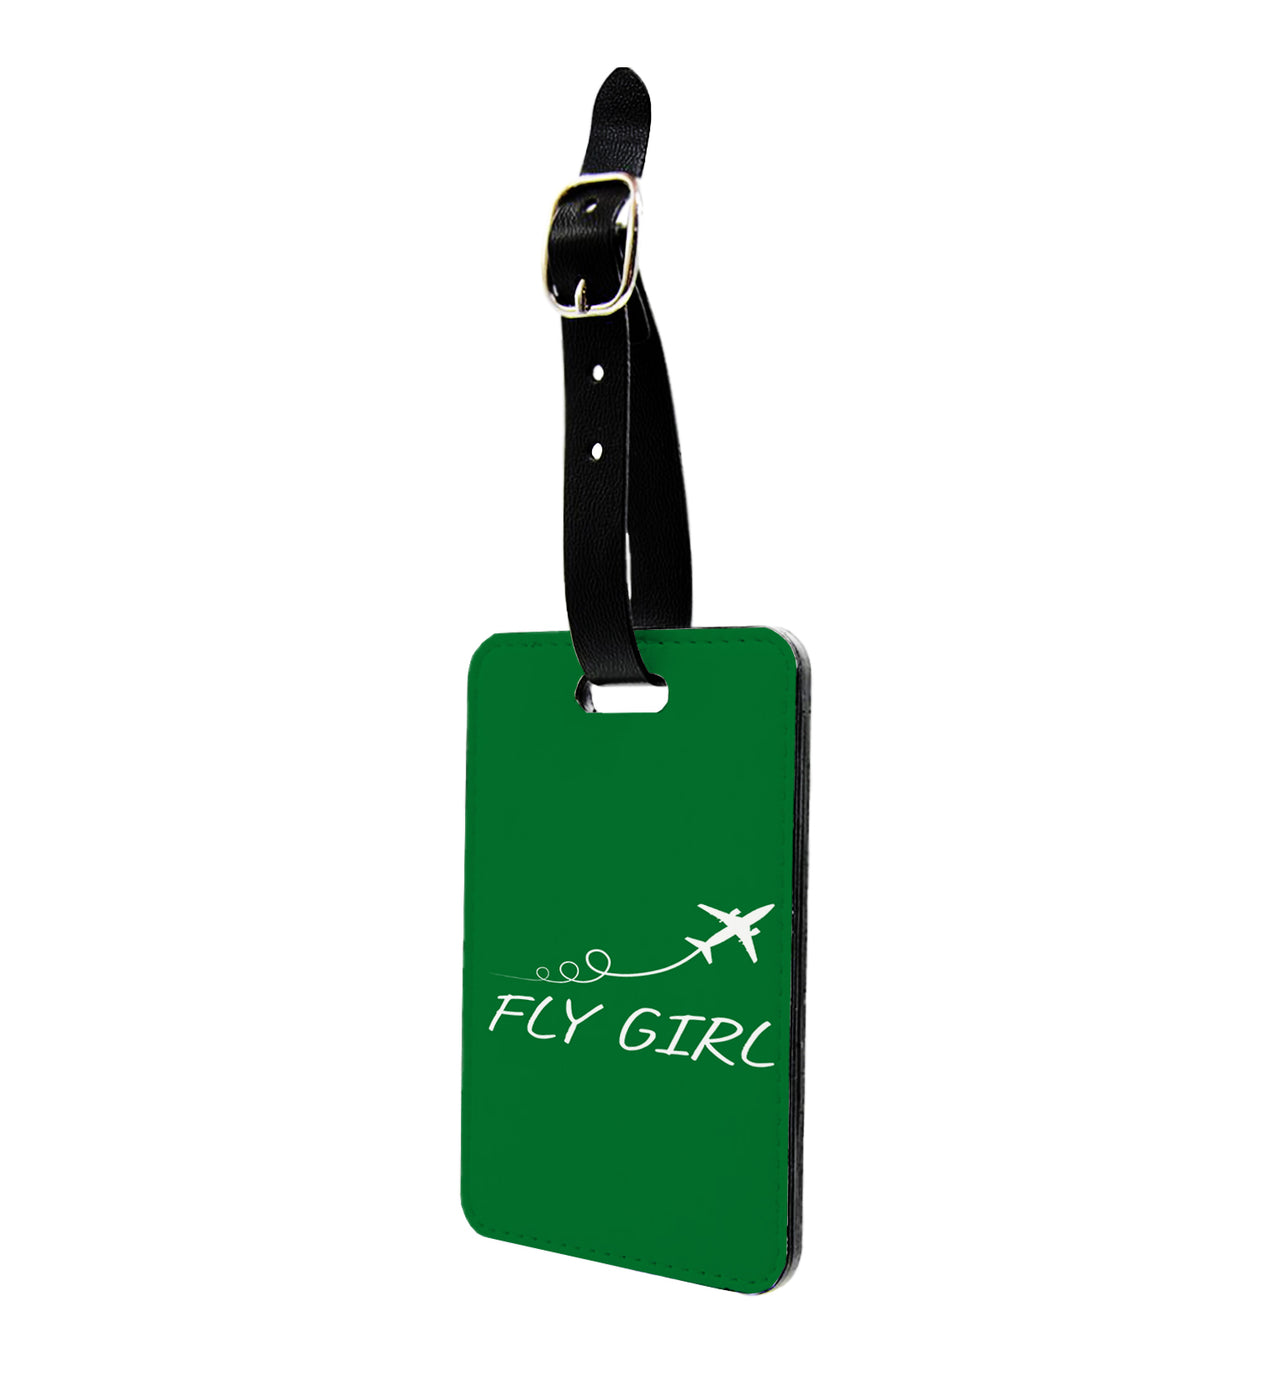 Just Fly It & Fly Girl Designed Luggage Tag